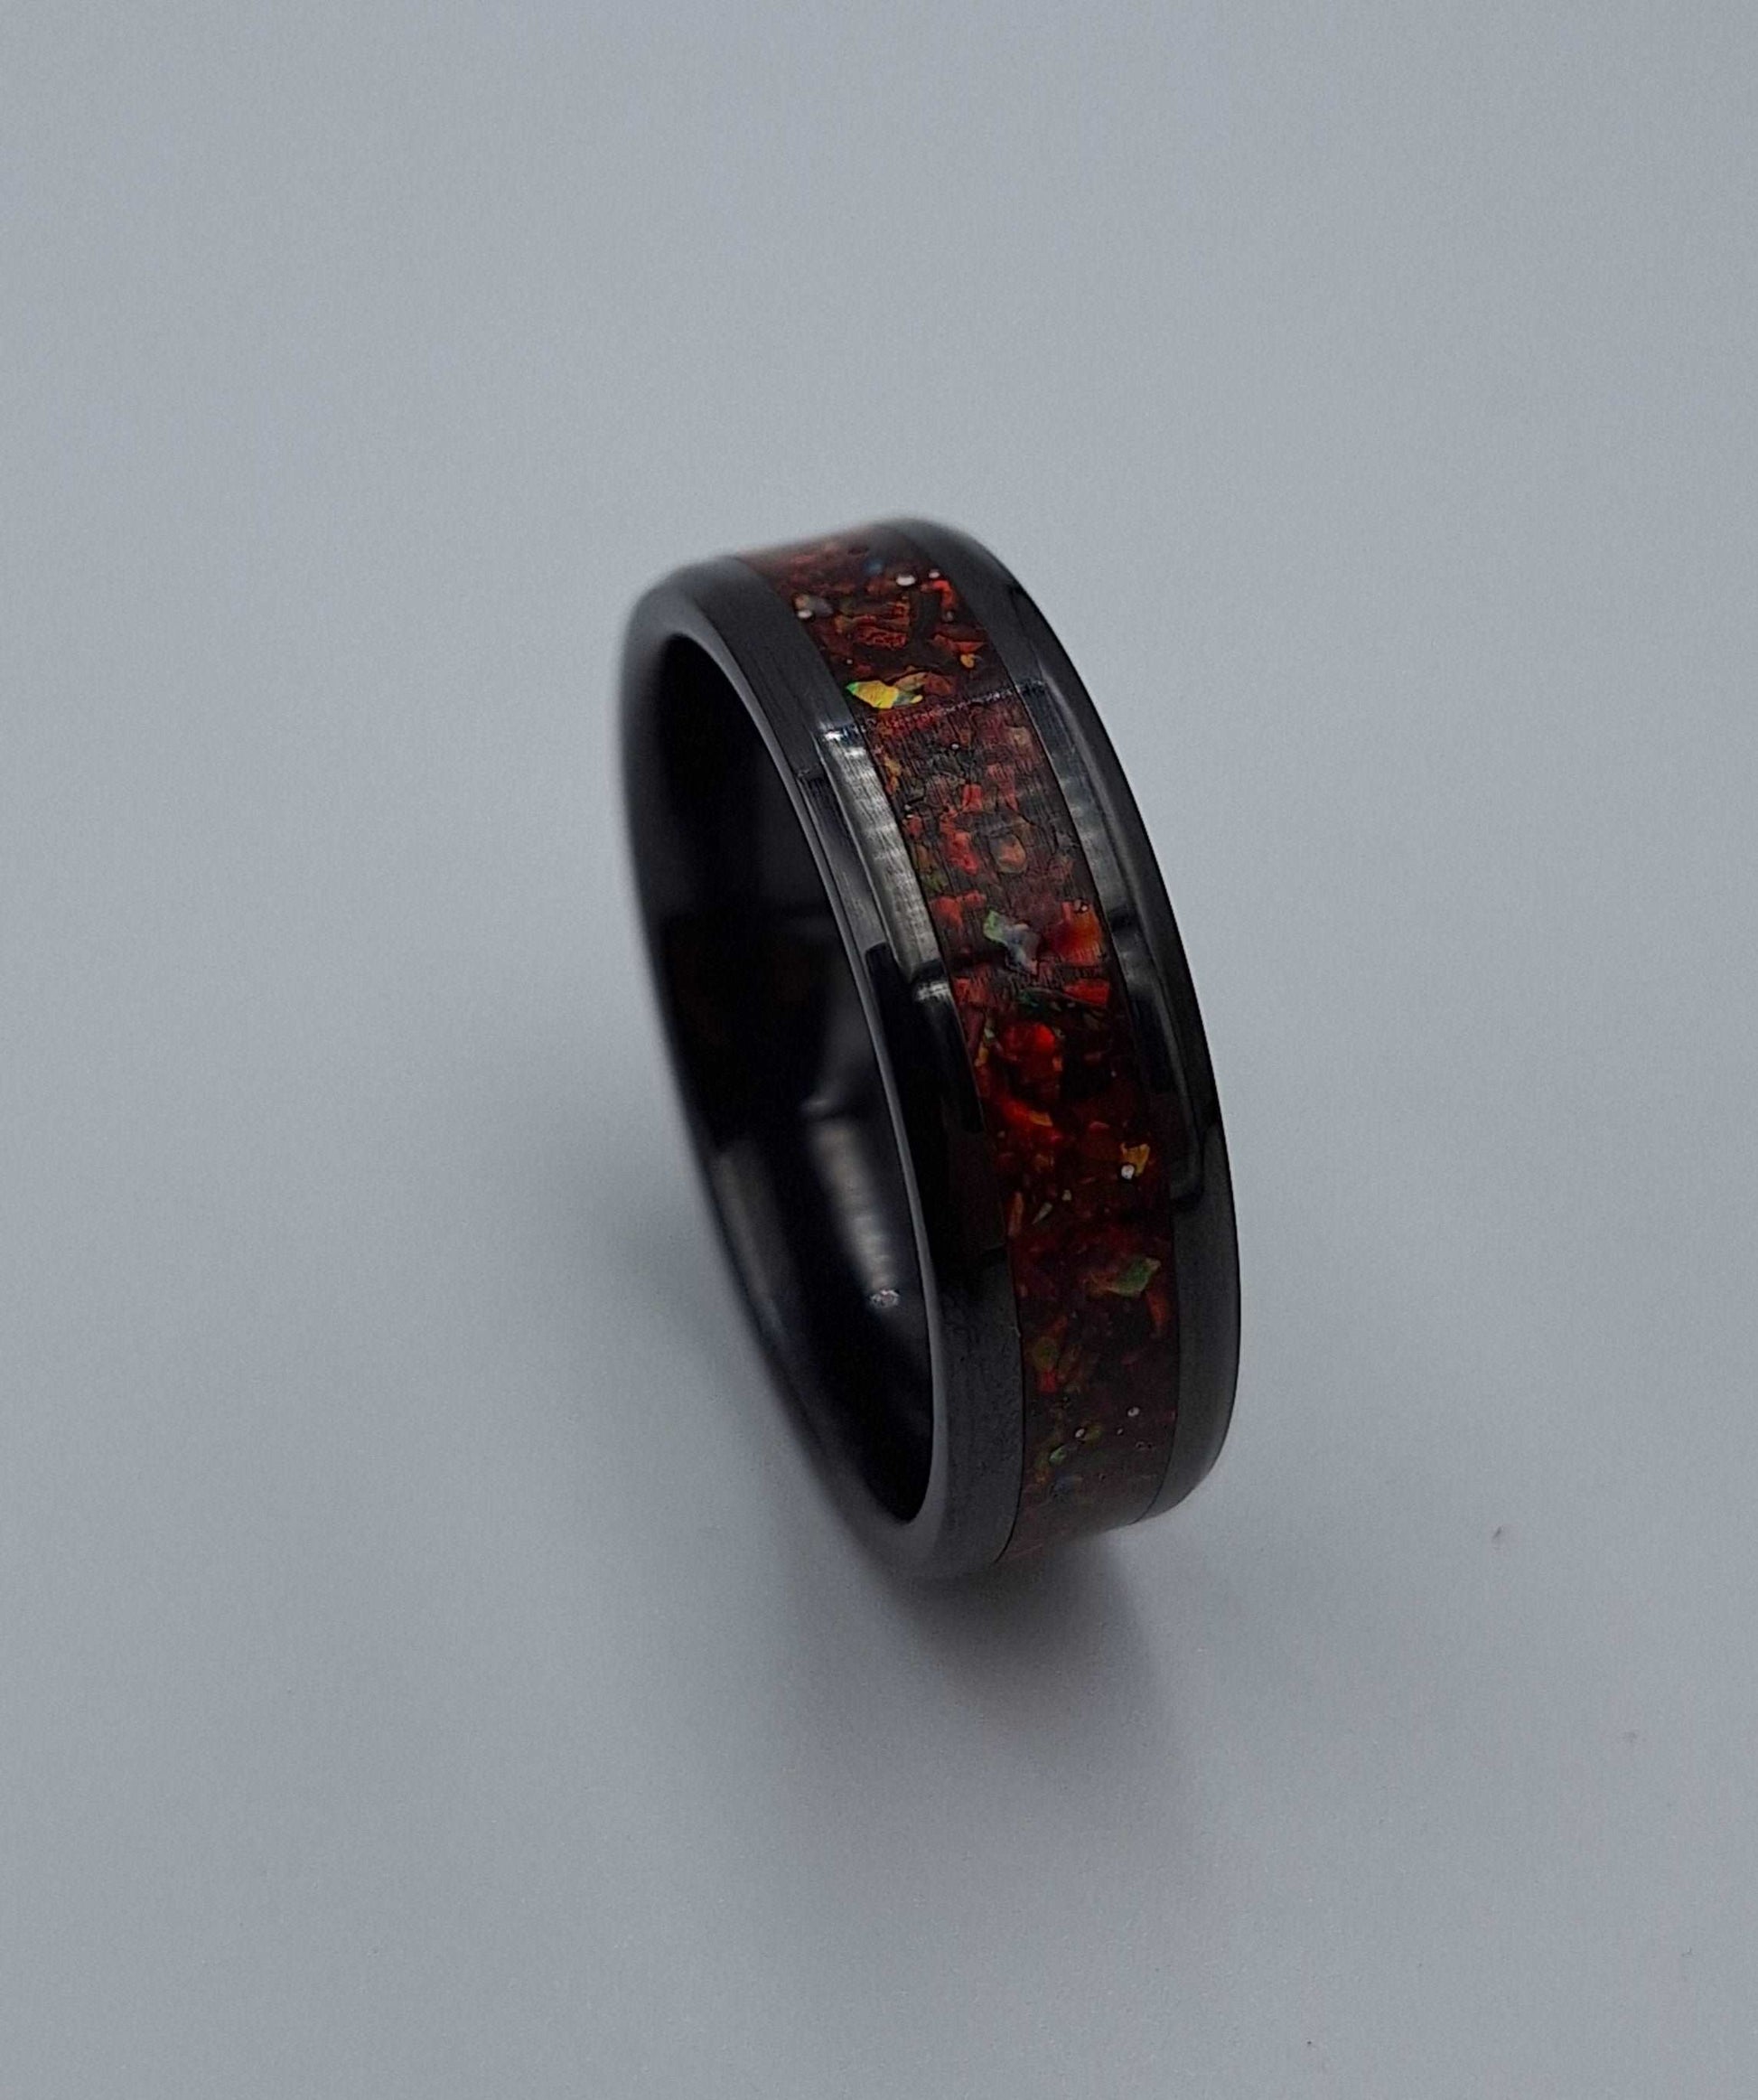 Black Ceramic 8mm Ring With Crushed Opals - Size 15